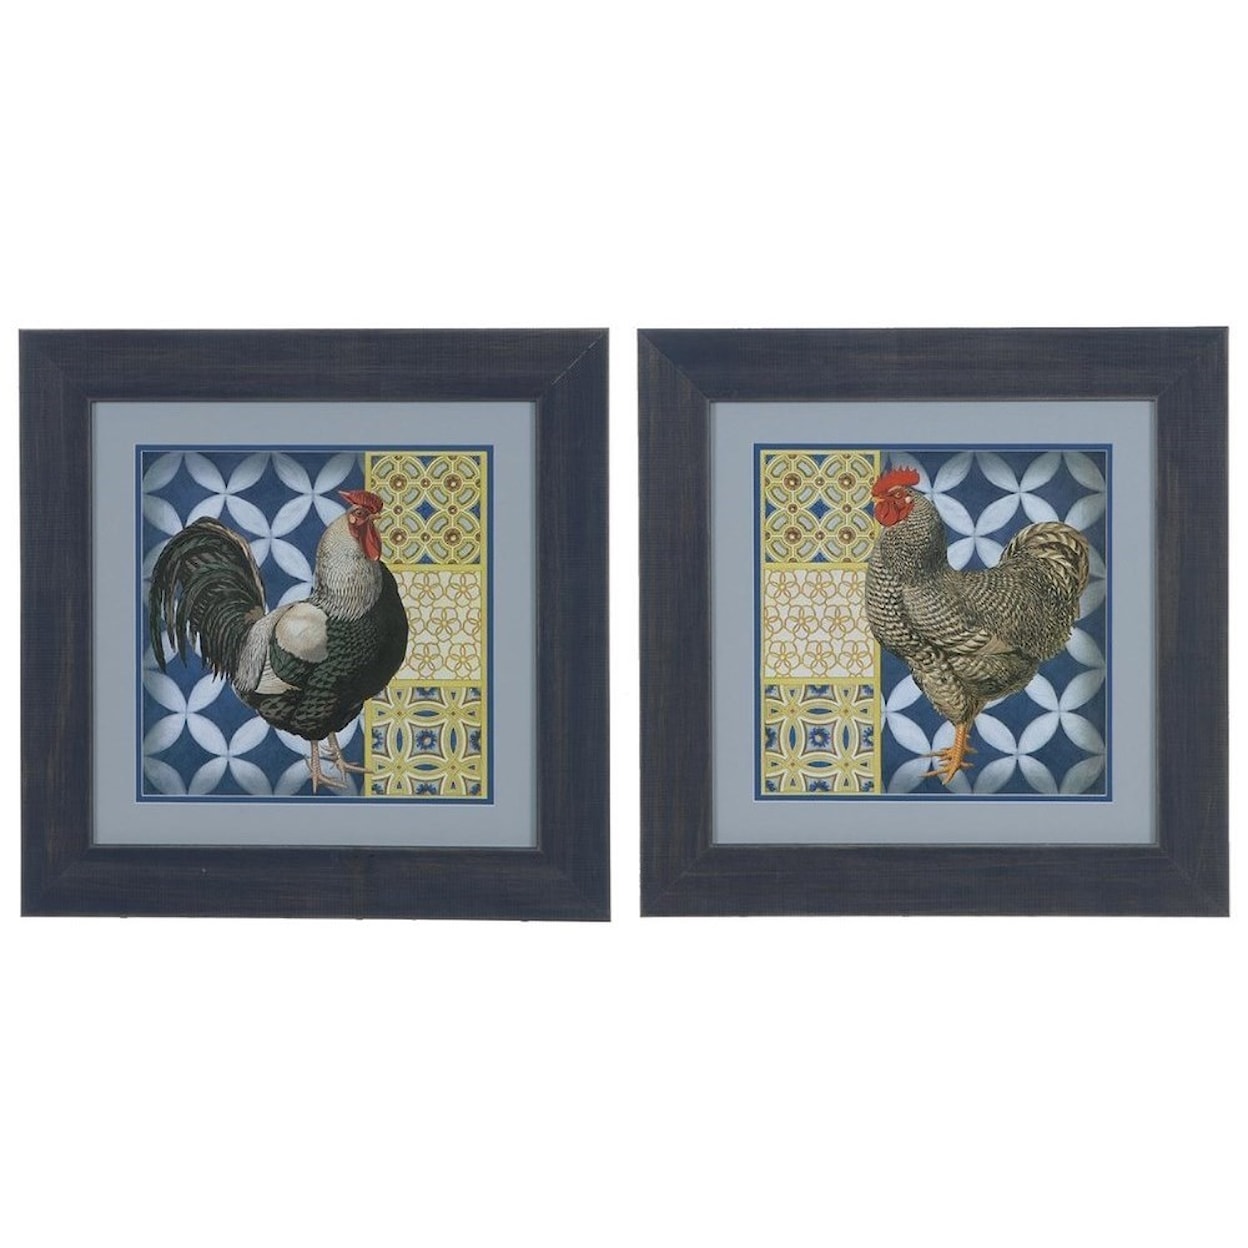 Crestview Collection Prints and Paintings Classic Rooster 1 & 2 (Set)